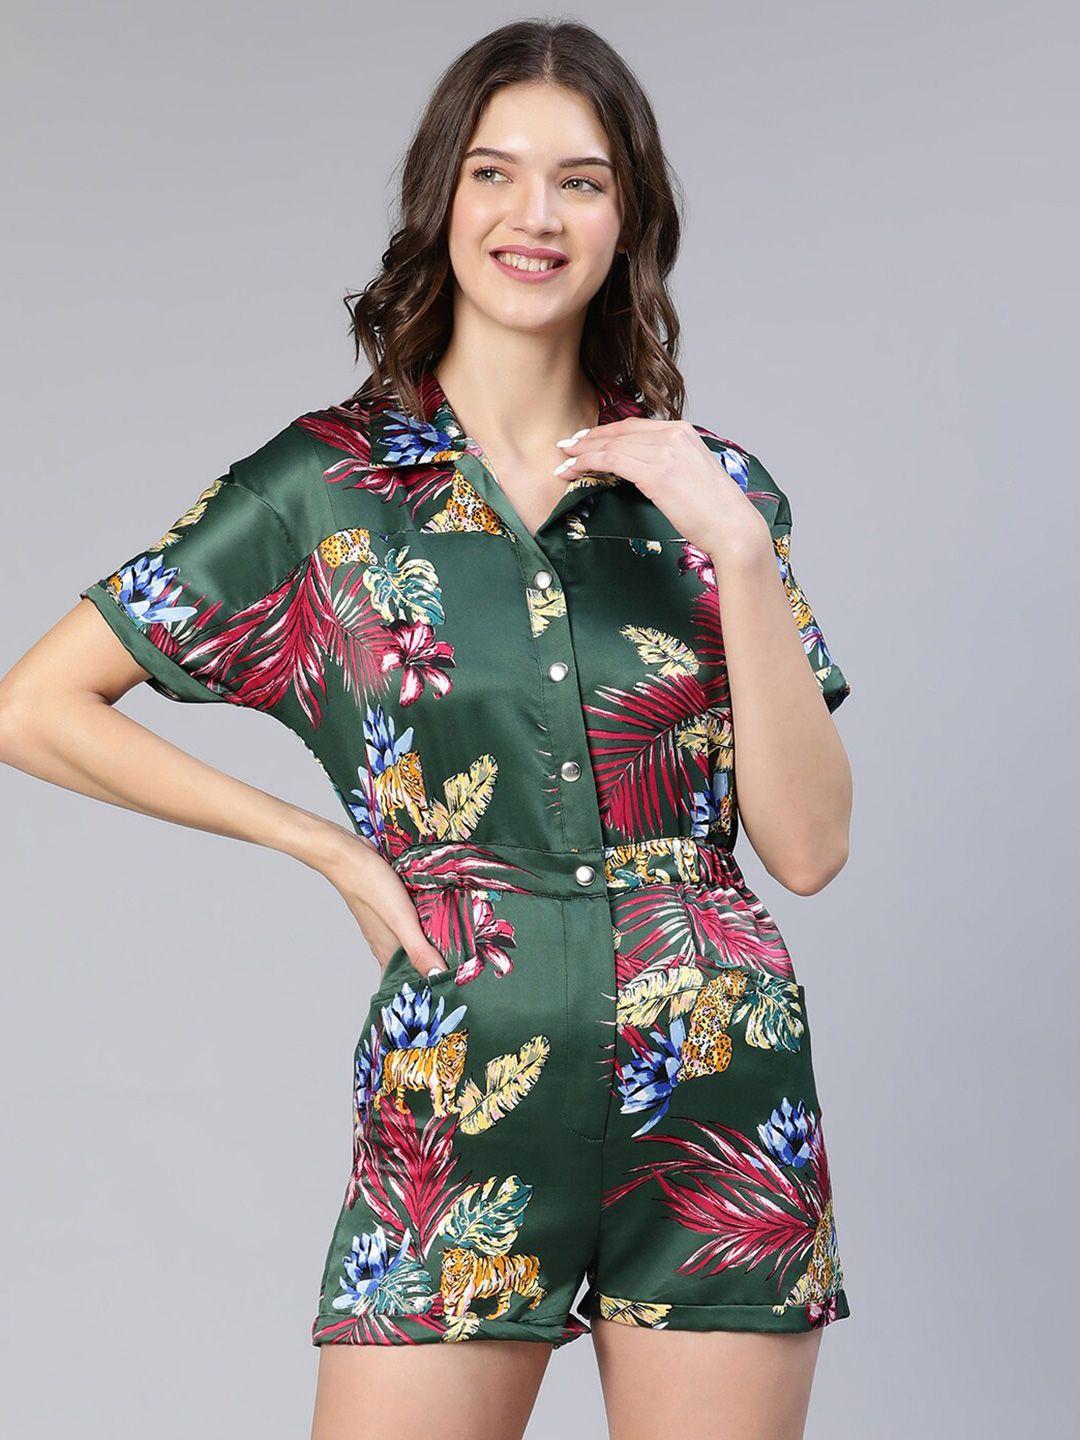 oxolloxo floral printed playsuit